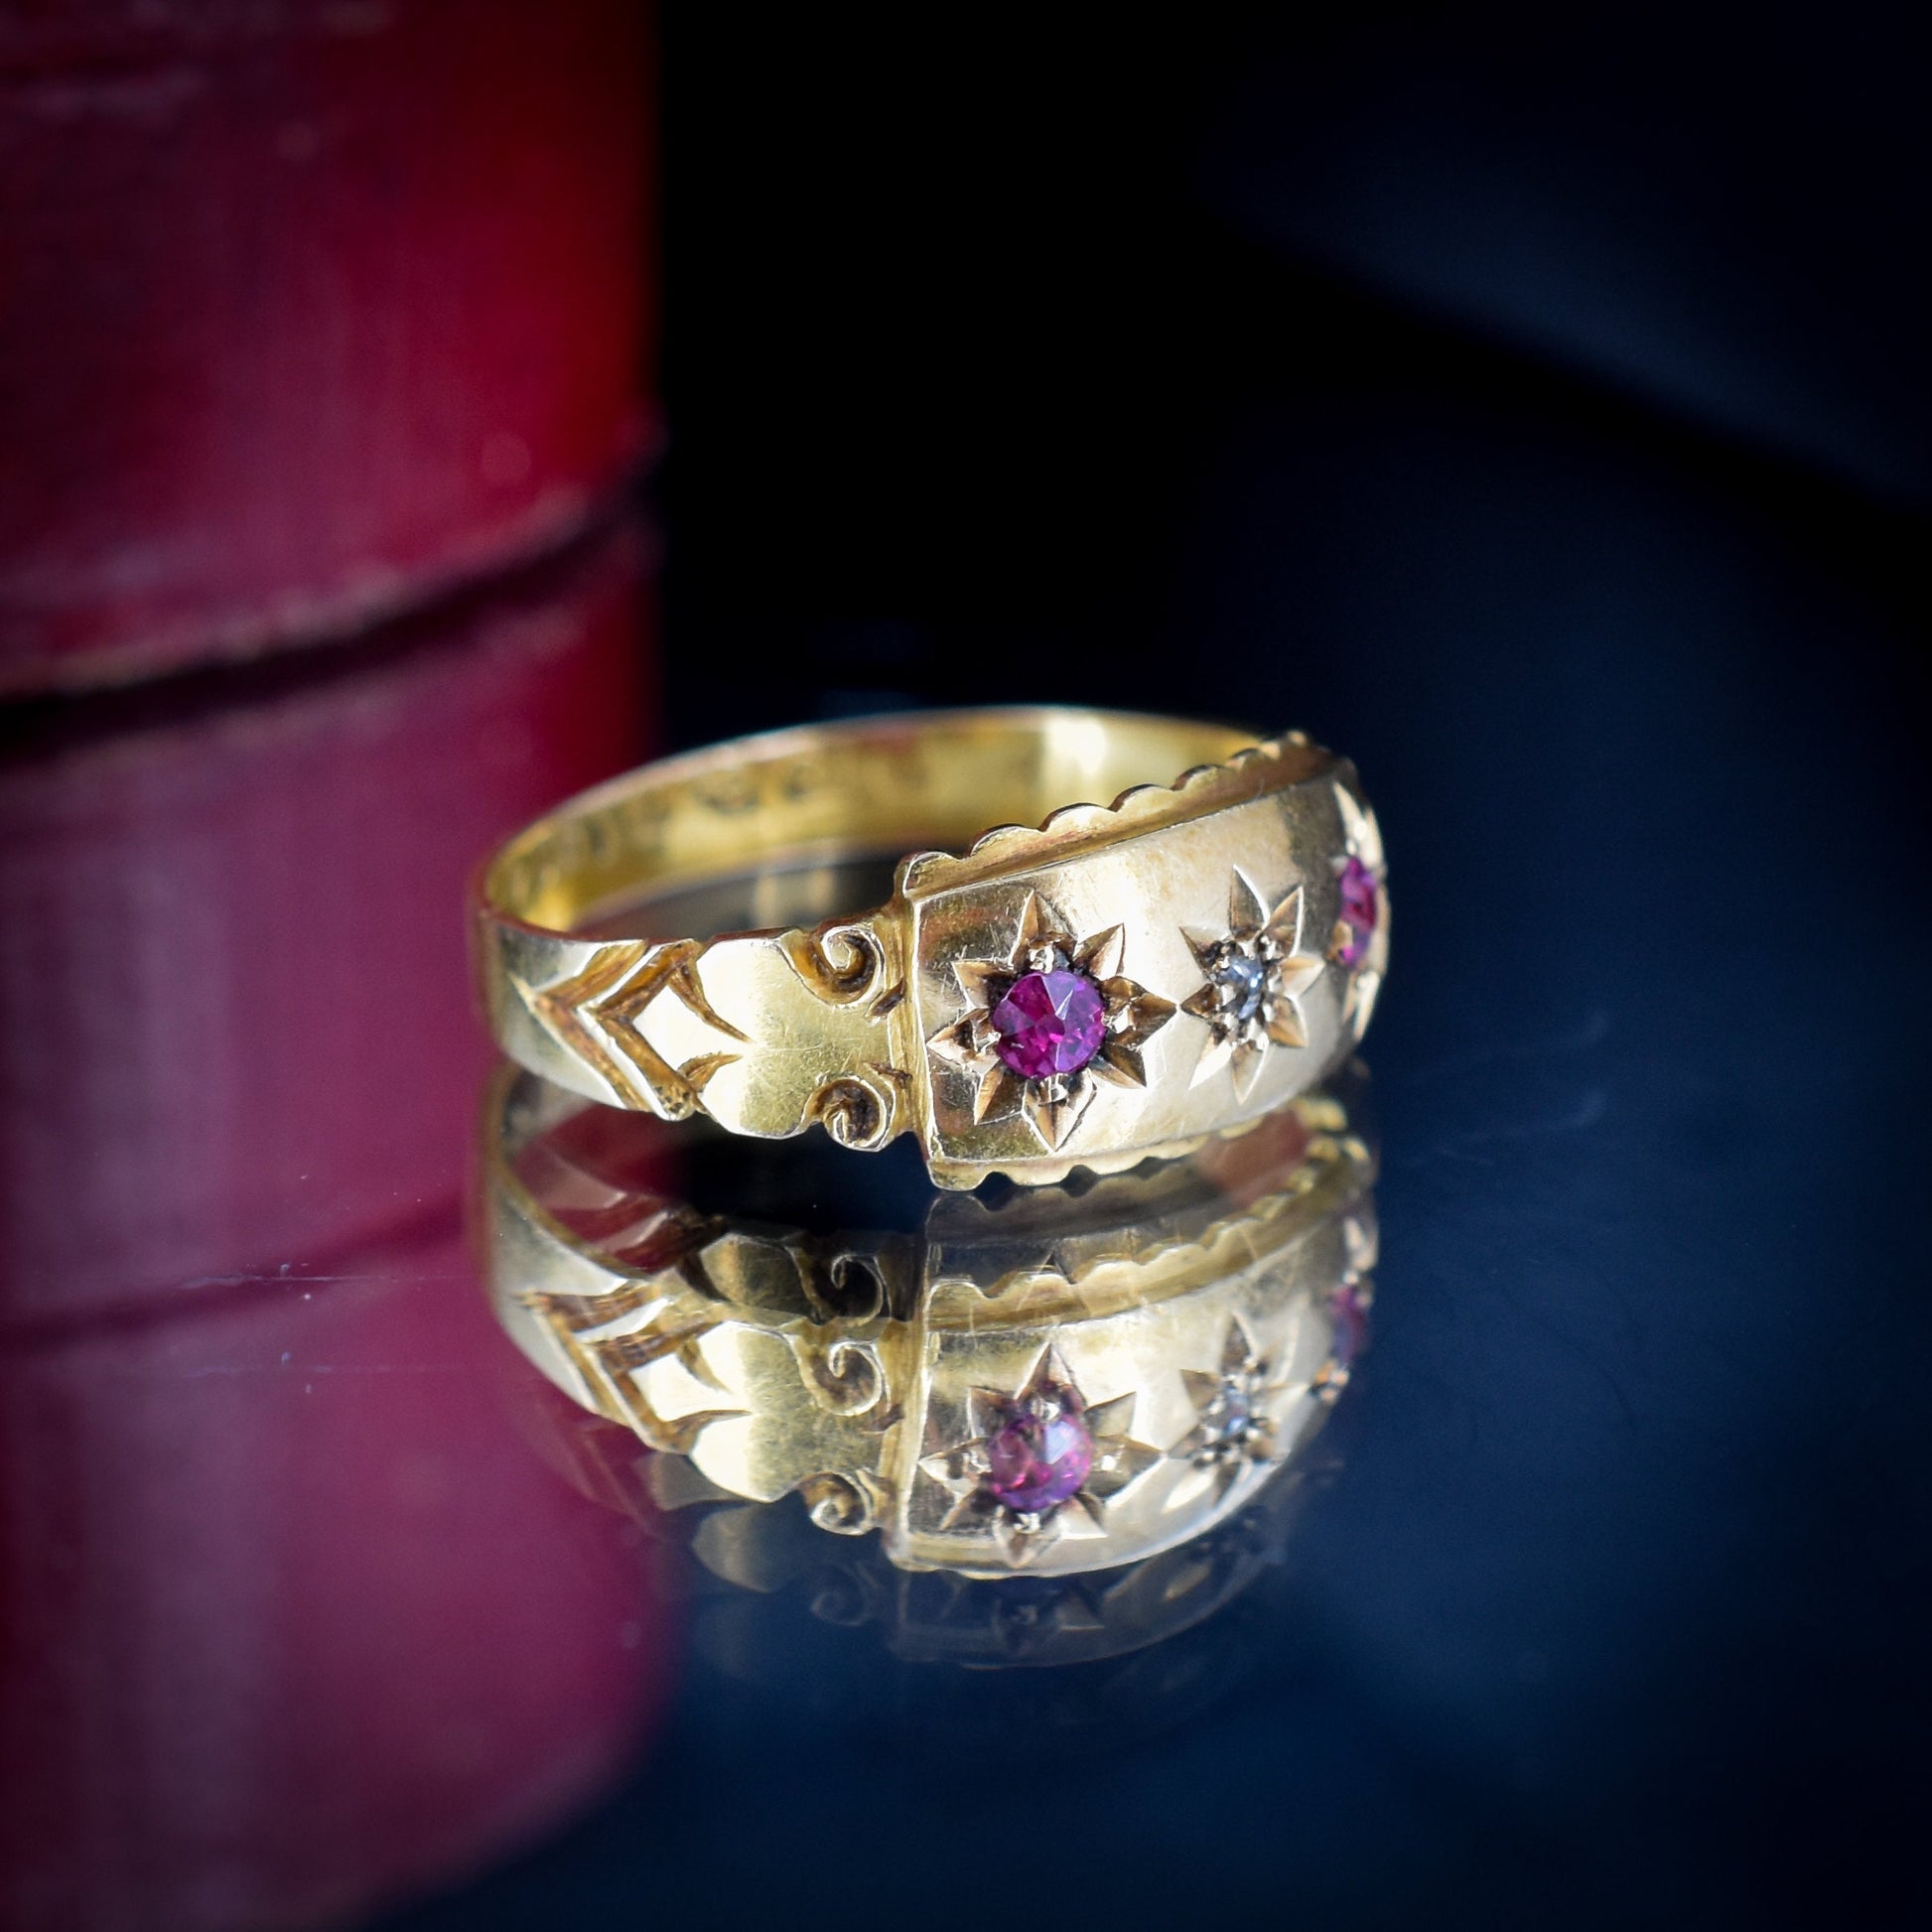 Antique Ruby Diamond Starburst 18ct Gold Gypsy Band Ring | Dated 1900